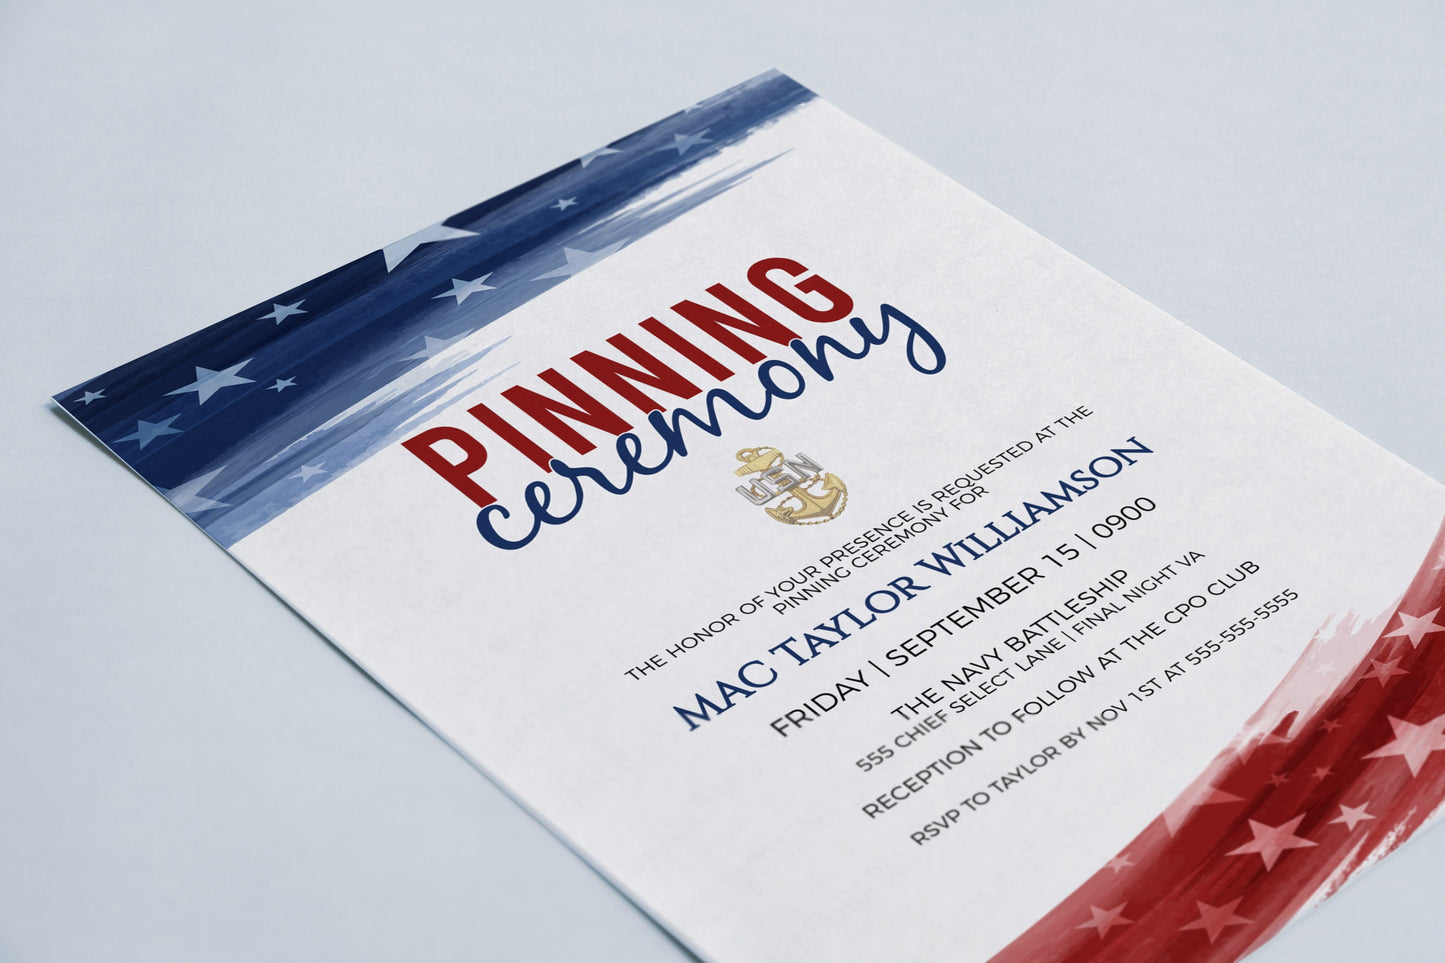 Editable CPO Pinning Ceremony Invitation, Chief Petty Officer Select Pinning Invite, United States Navy Pinning Event, Printable